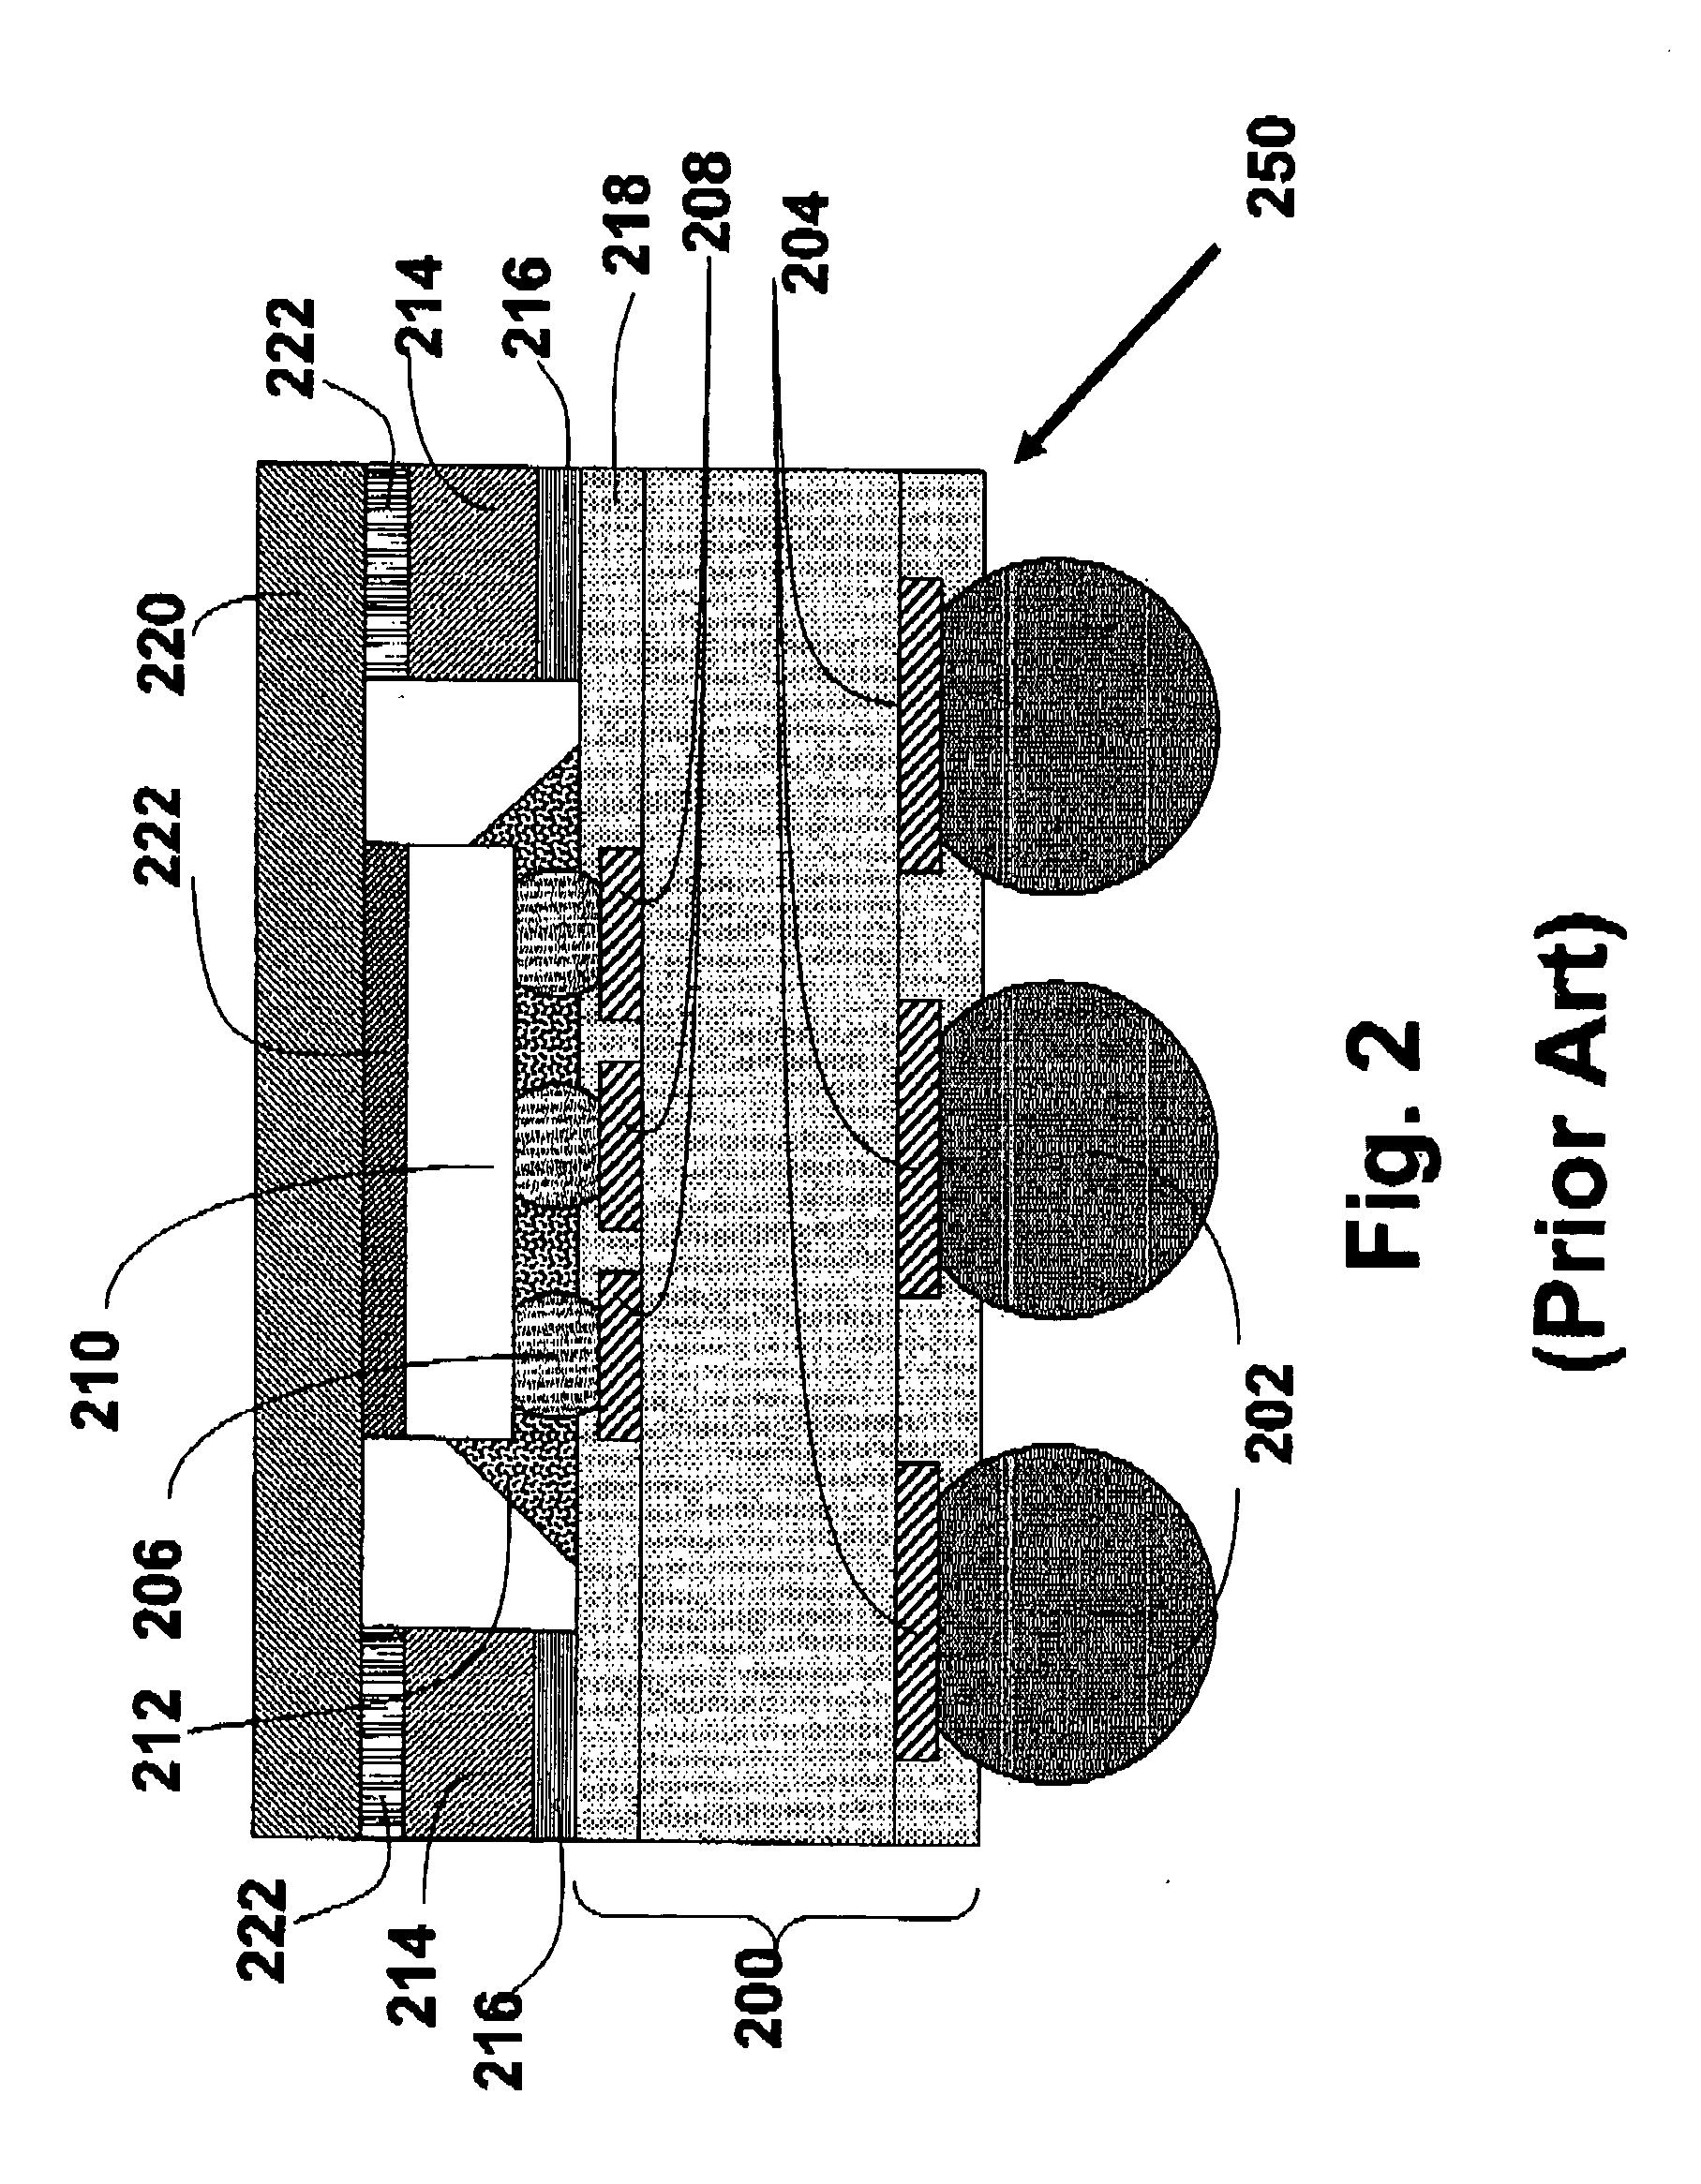 Novel integrated circuit support structures and their fabrication